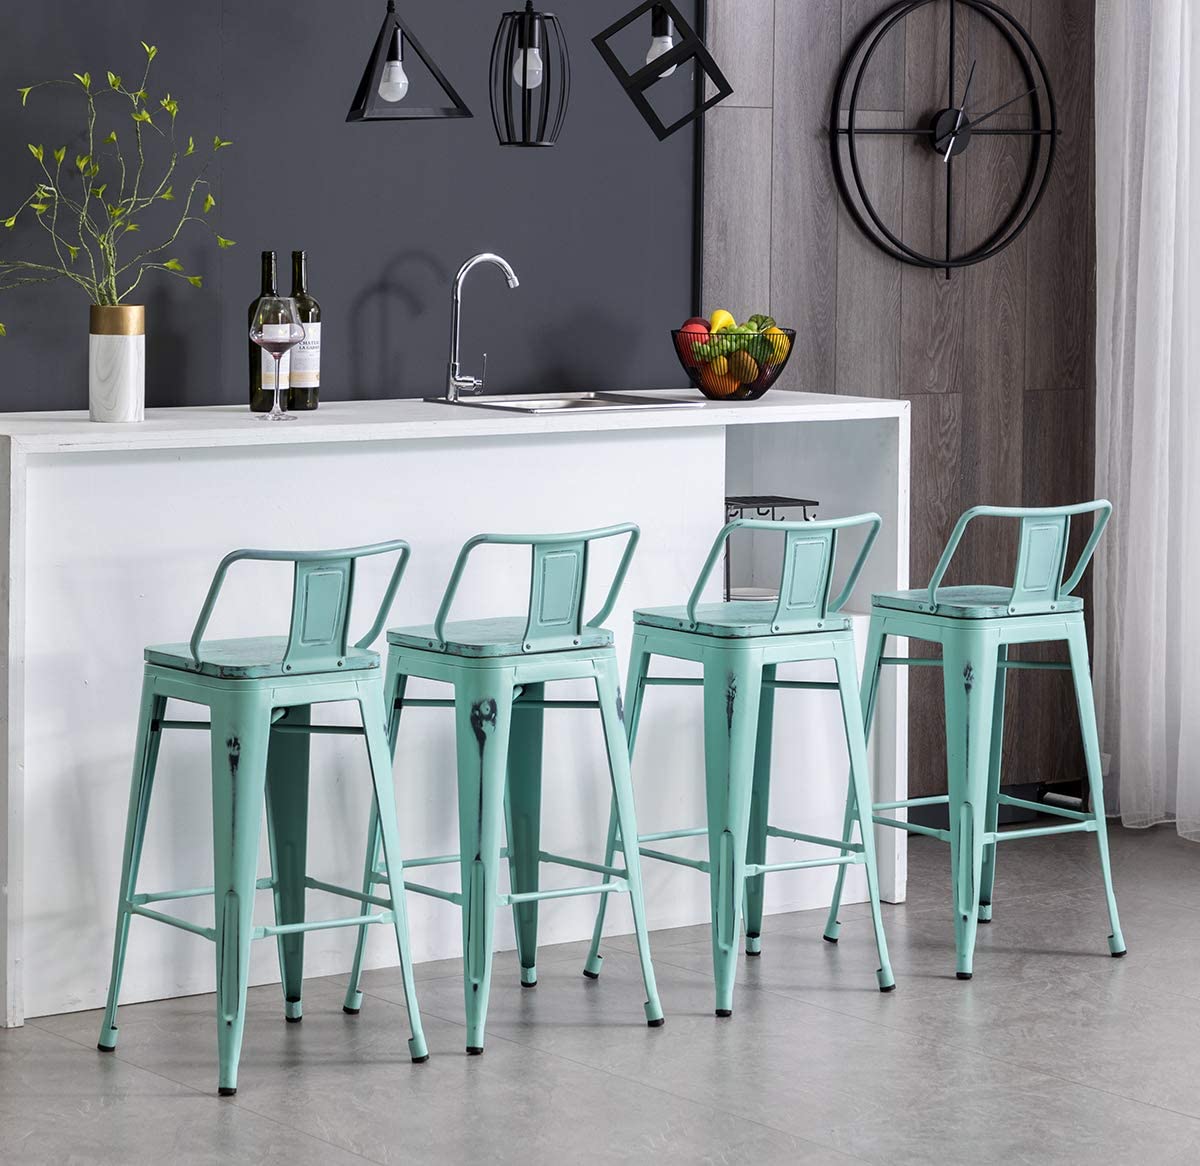 Bar Stools: Metal Barstools Counter Height Stools with Wooden Seat [Set of 4]